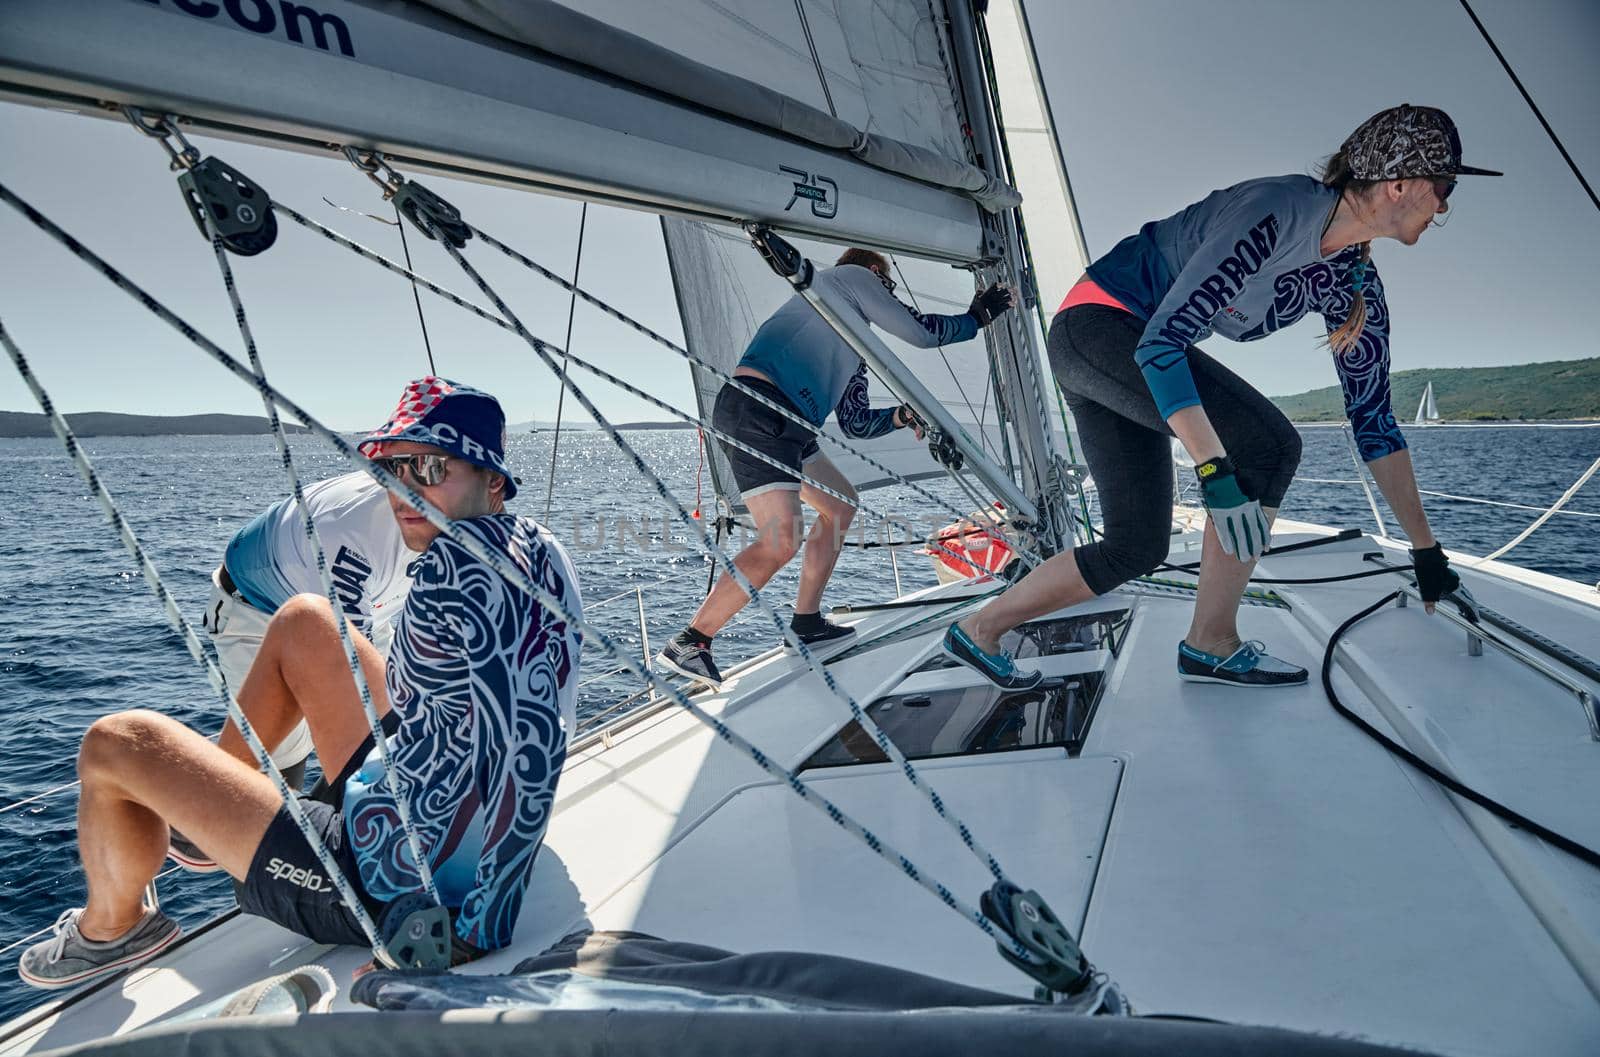 Croatia, Mediterranean Sea, 18 September 2019: The team of sailboat turns off the boat, sailboats compete in a sail regatta, The team works, pulls to a rope, a steering wheel, multicolored spinnakers by vladimirdrozdin